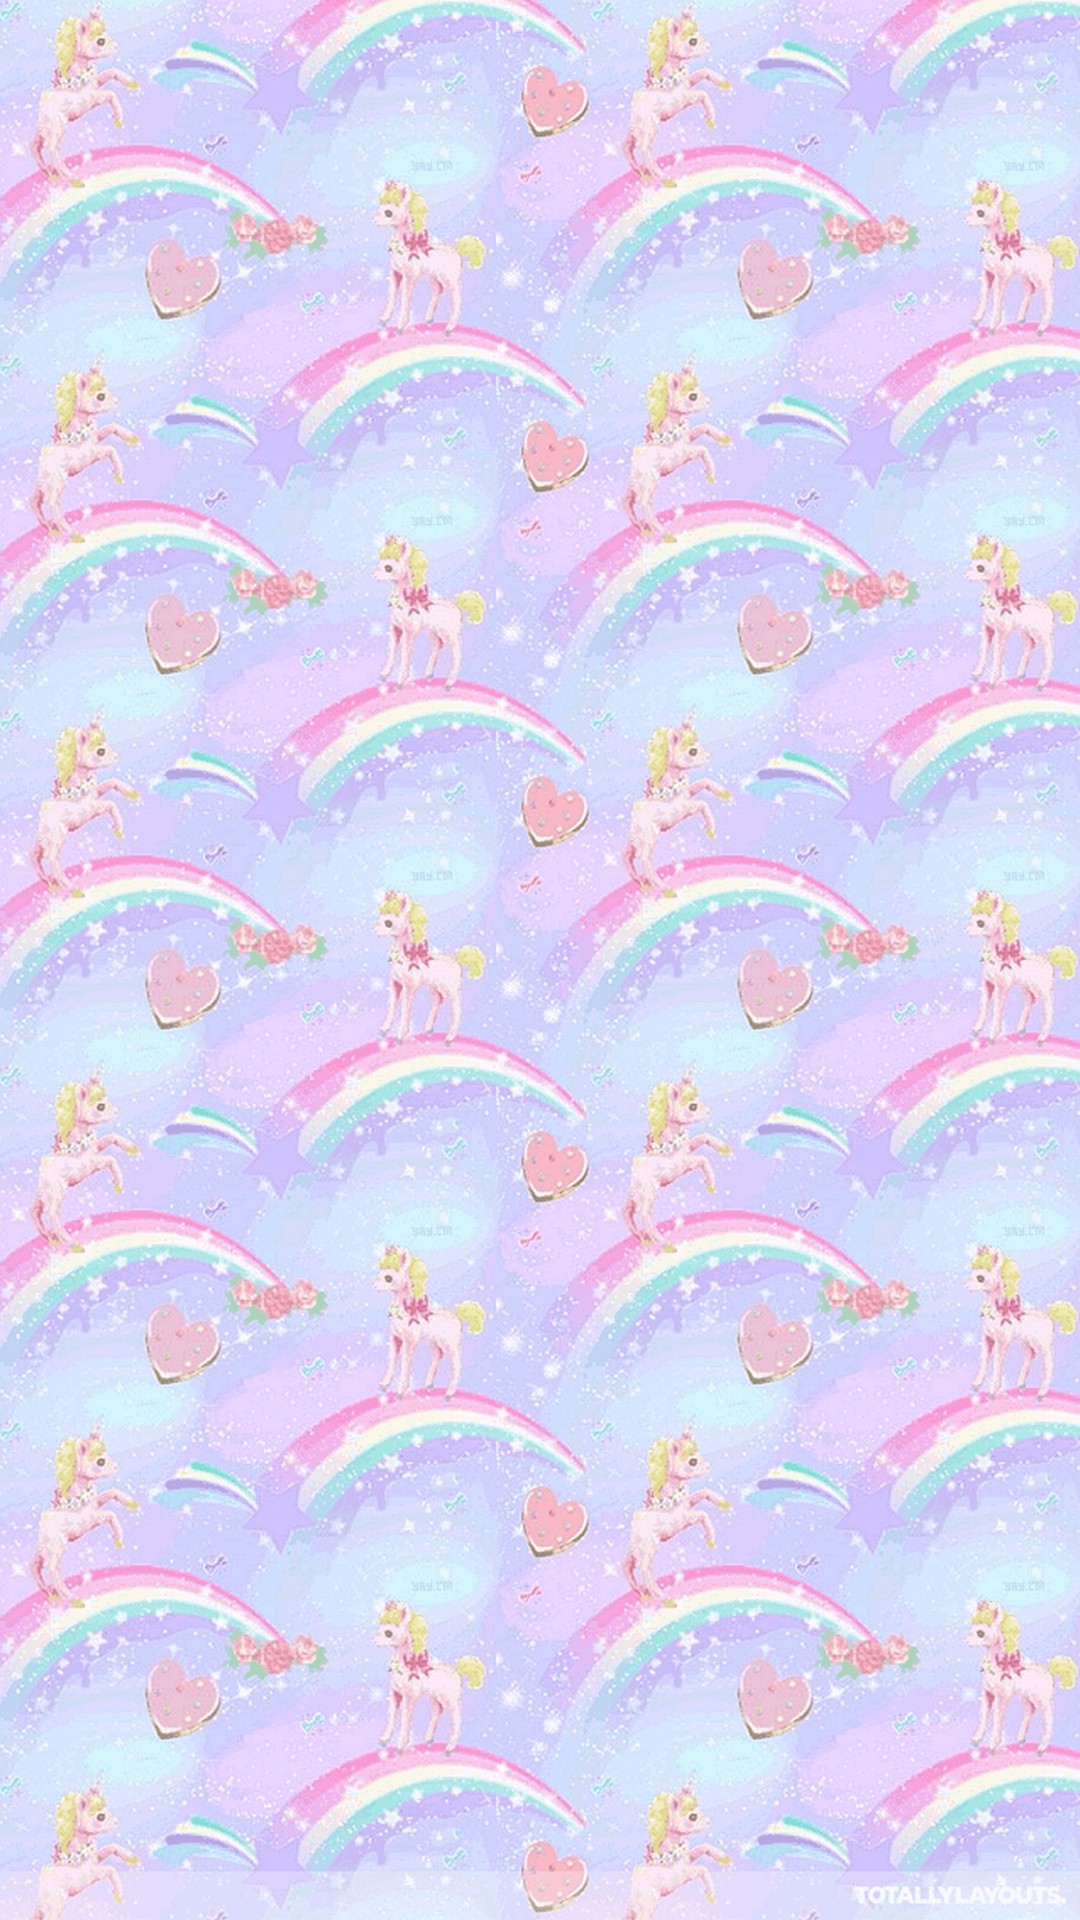 Cute Girly Unicorn iPhone Home Screen Wallpaper with high-resolution 1080x1920 pixel. You can set as wallpaper for Apple iPhone X, XS Max, XR, 8, 7, 6, SE, iPad. Enjoy and share your favorite HD wallpapers and background images